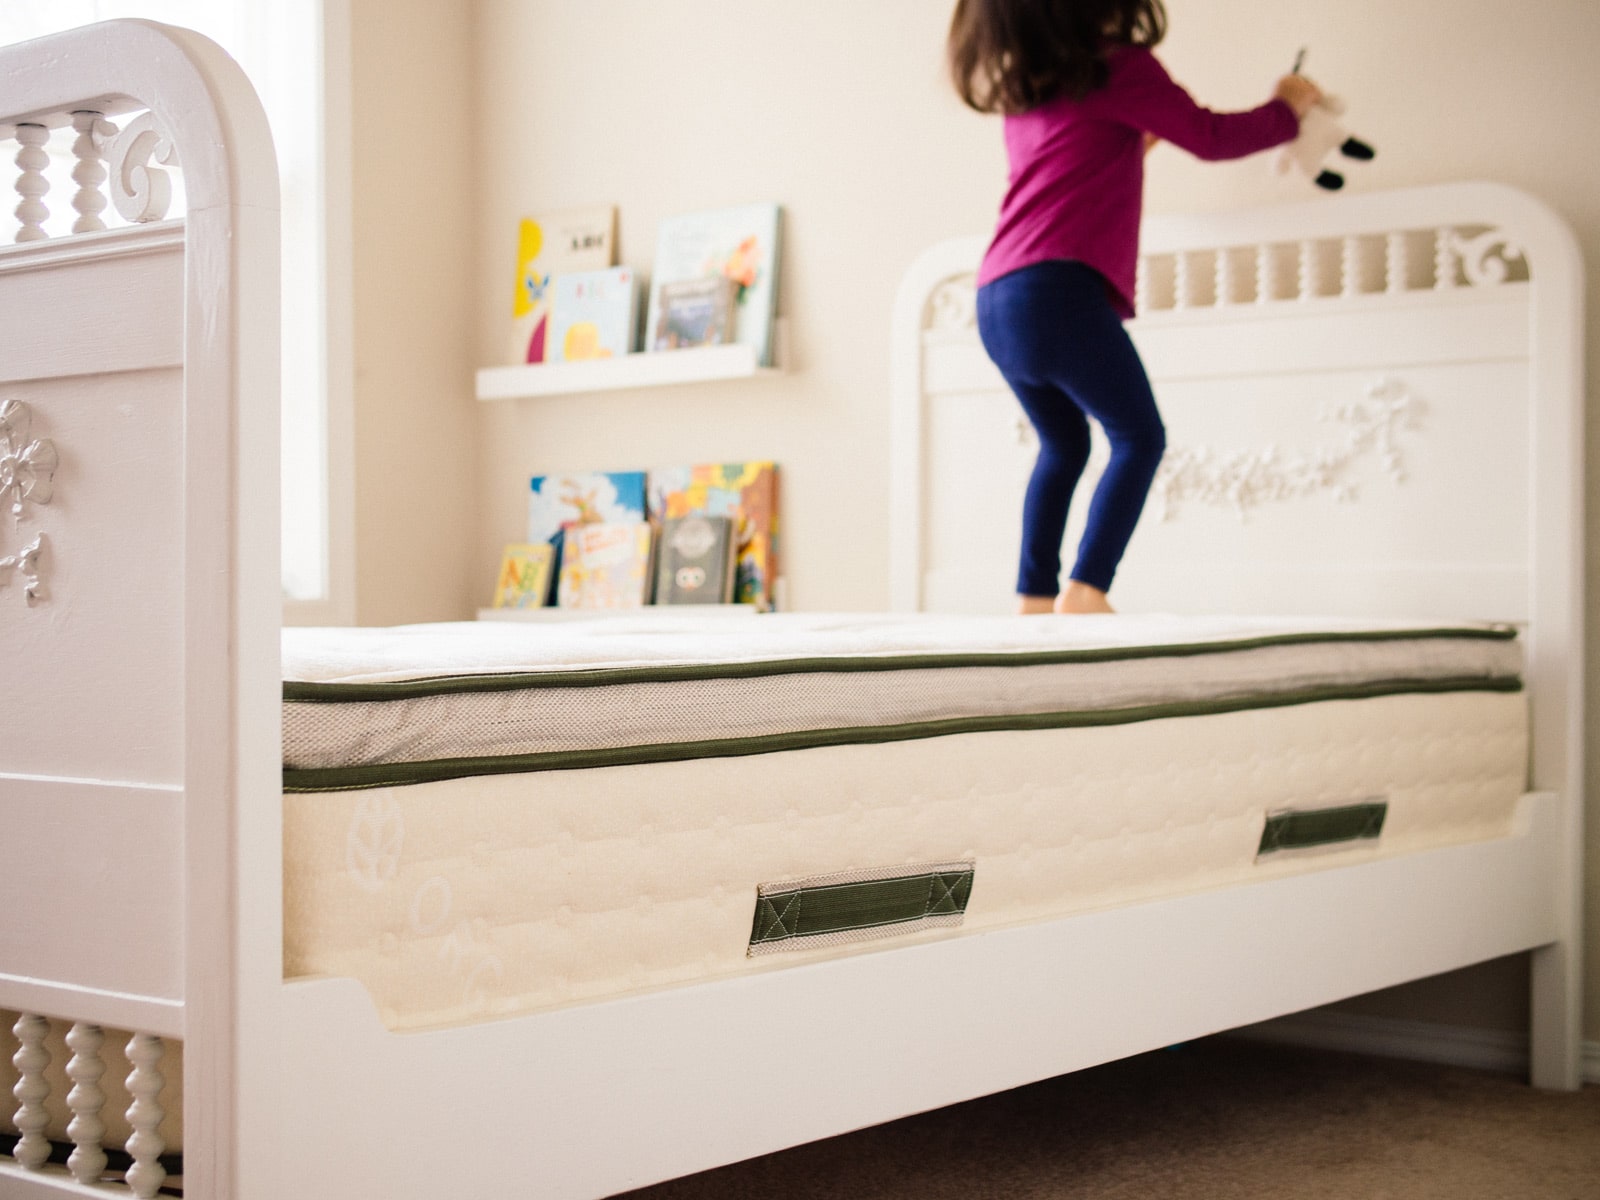 An eco-friendly mattress for busy families